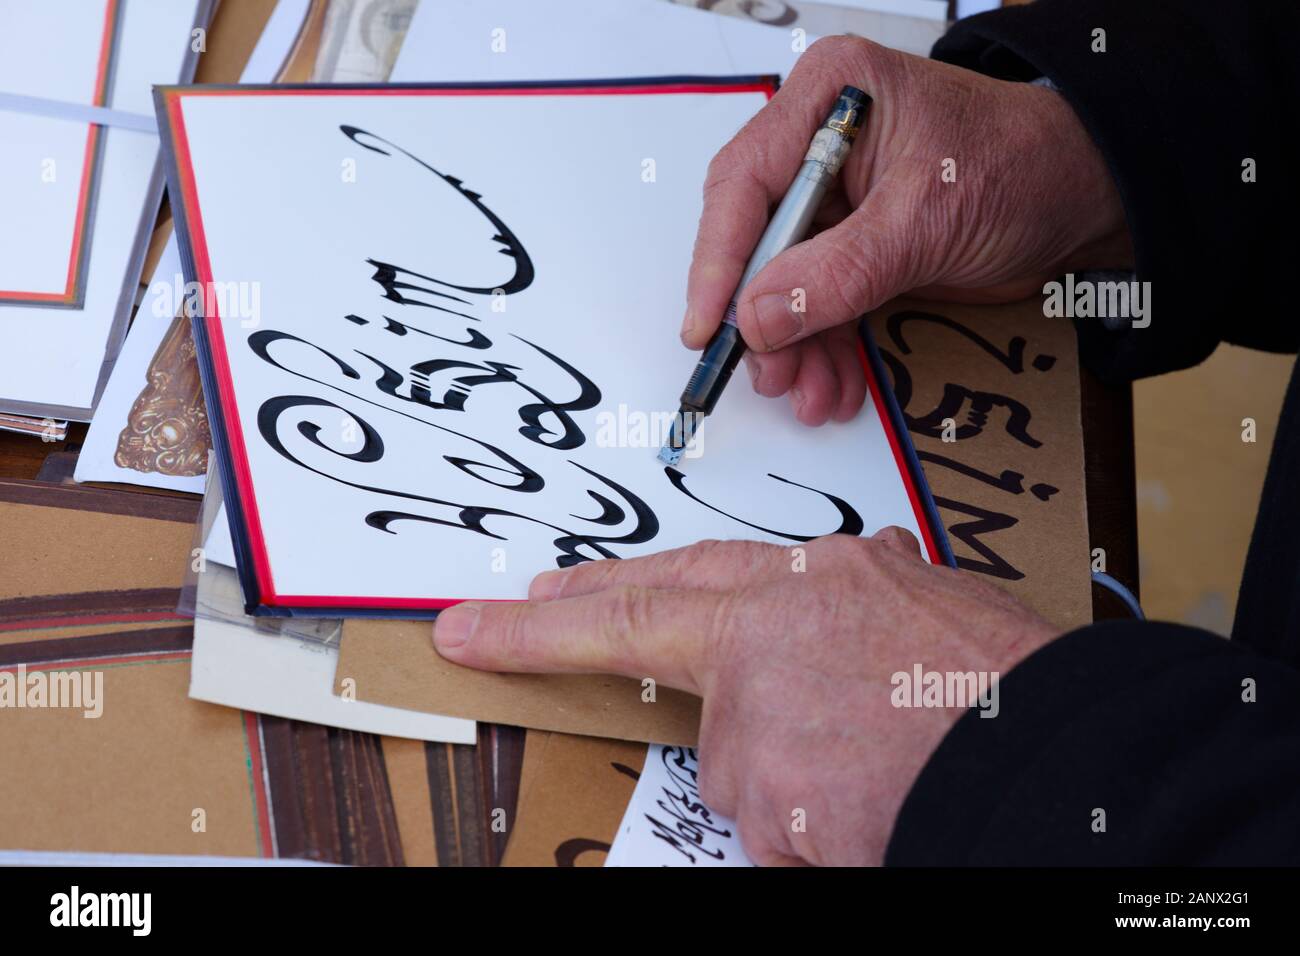 Hüsn-ı Calligraphy. the calligrapher writes arabic writing with calligraphy pen on paper. islamic calligraphy art and workshop. Stock Photo